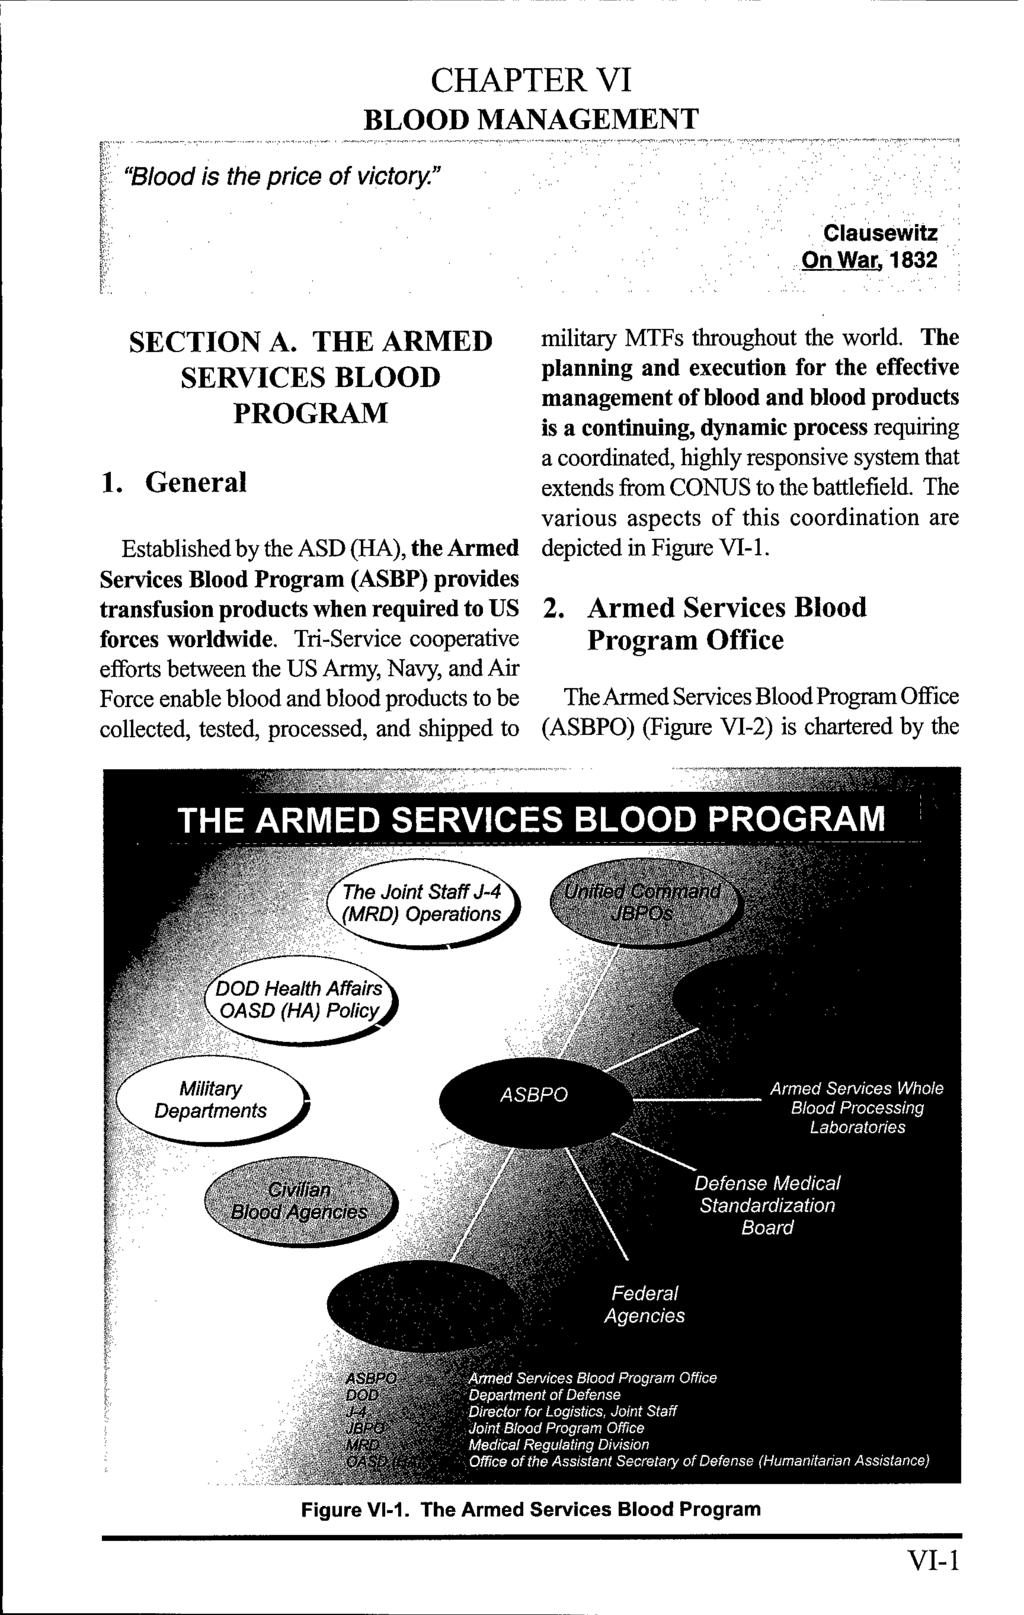 "Blood is the price of victory." CHAPTER VI BLOOD MANAGEMENT Clausewitz On War. 1832 SECTION A. THE ARMED SERVICES BLOOD PROGRAM 1.